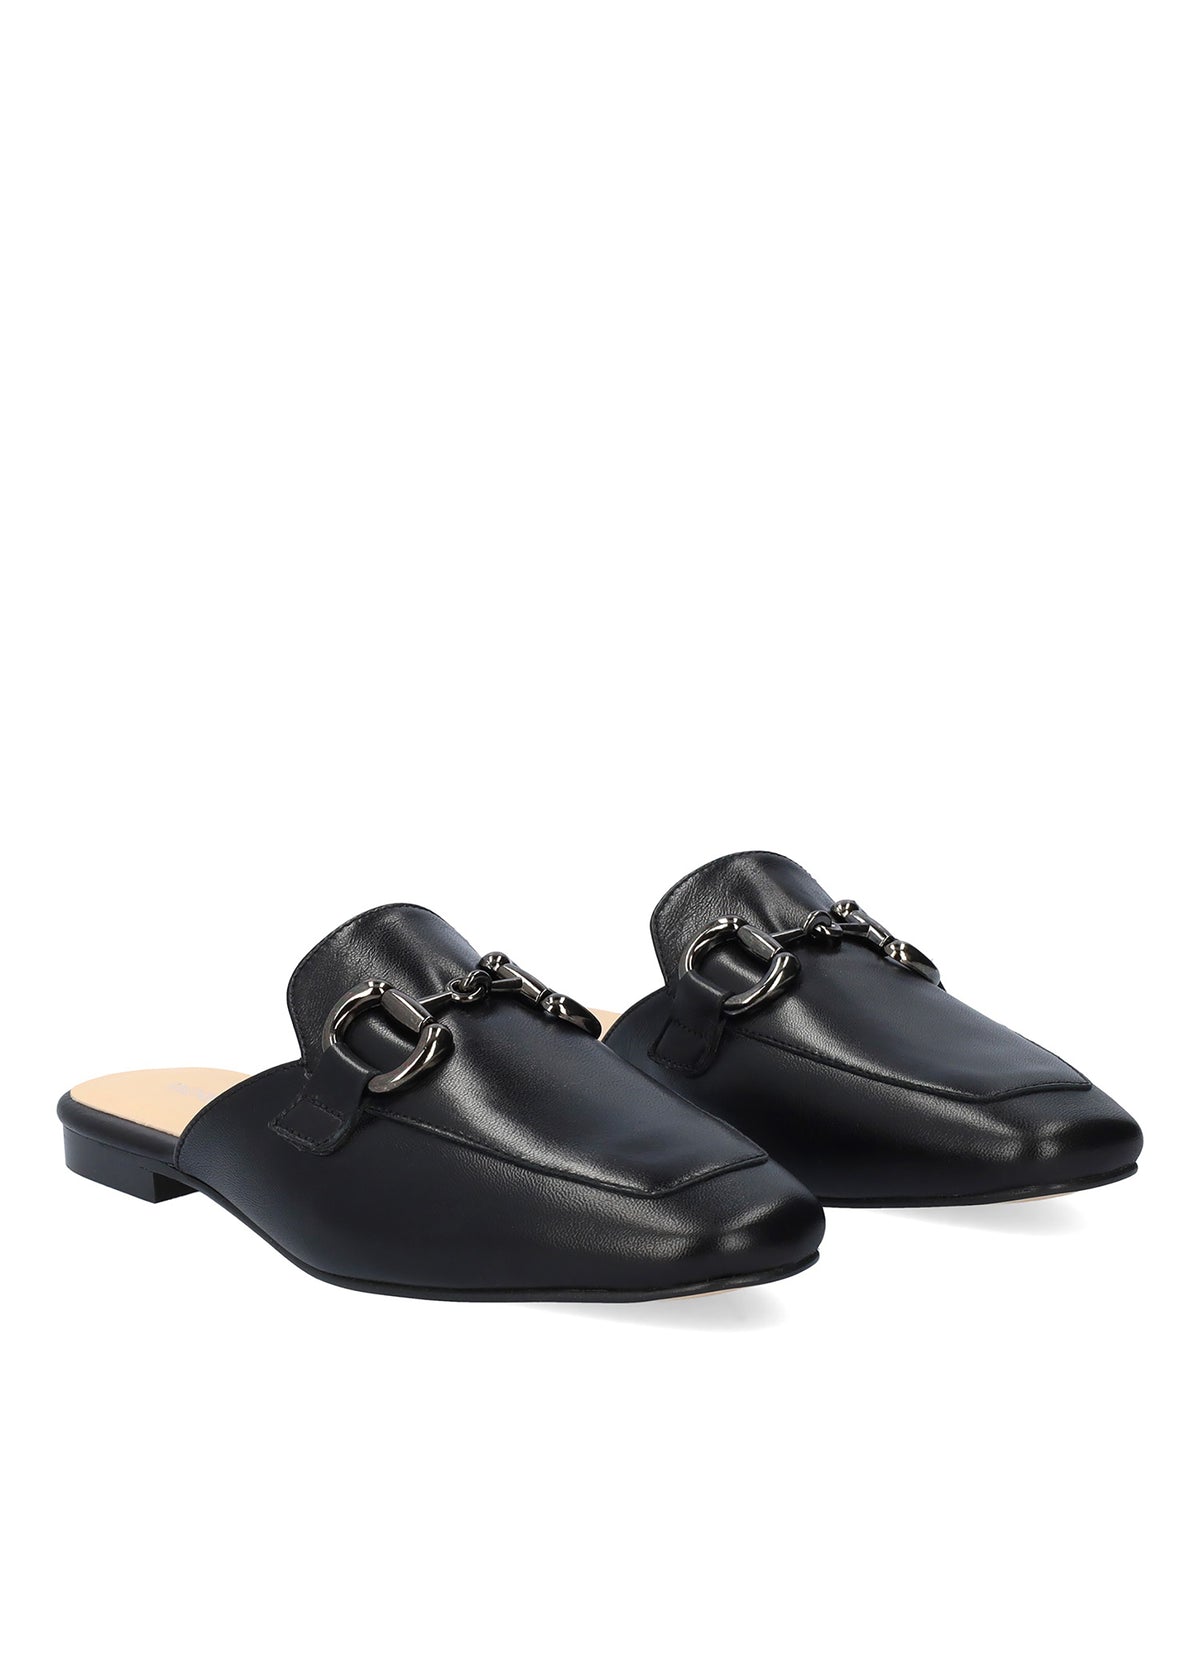 Stiletto sandals with loafer tip - Vivian, black leather